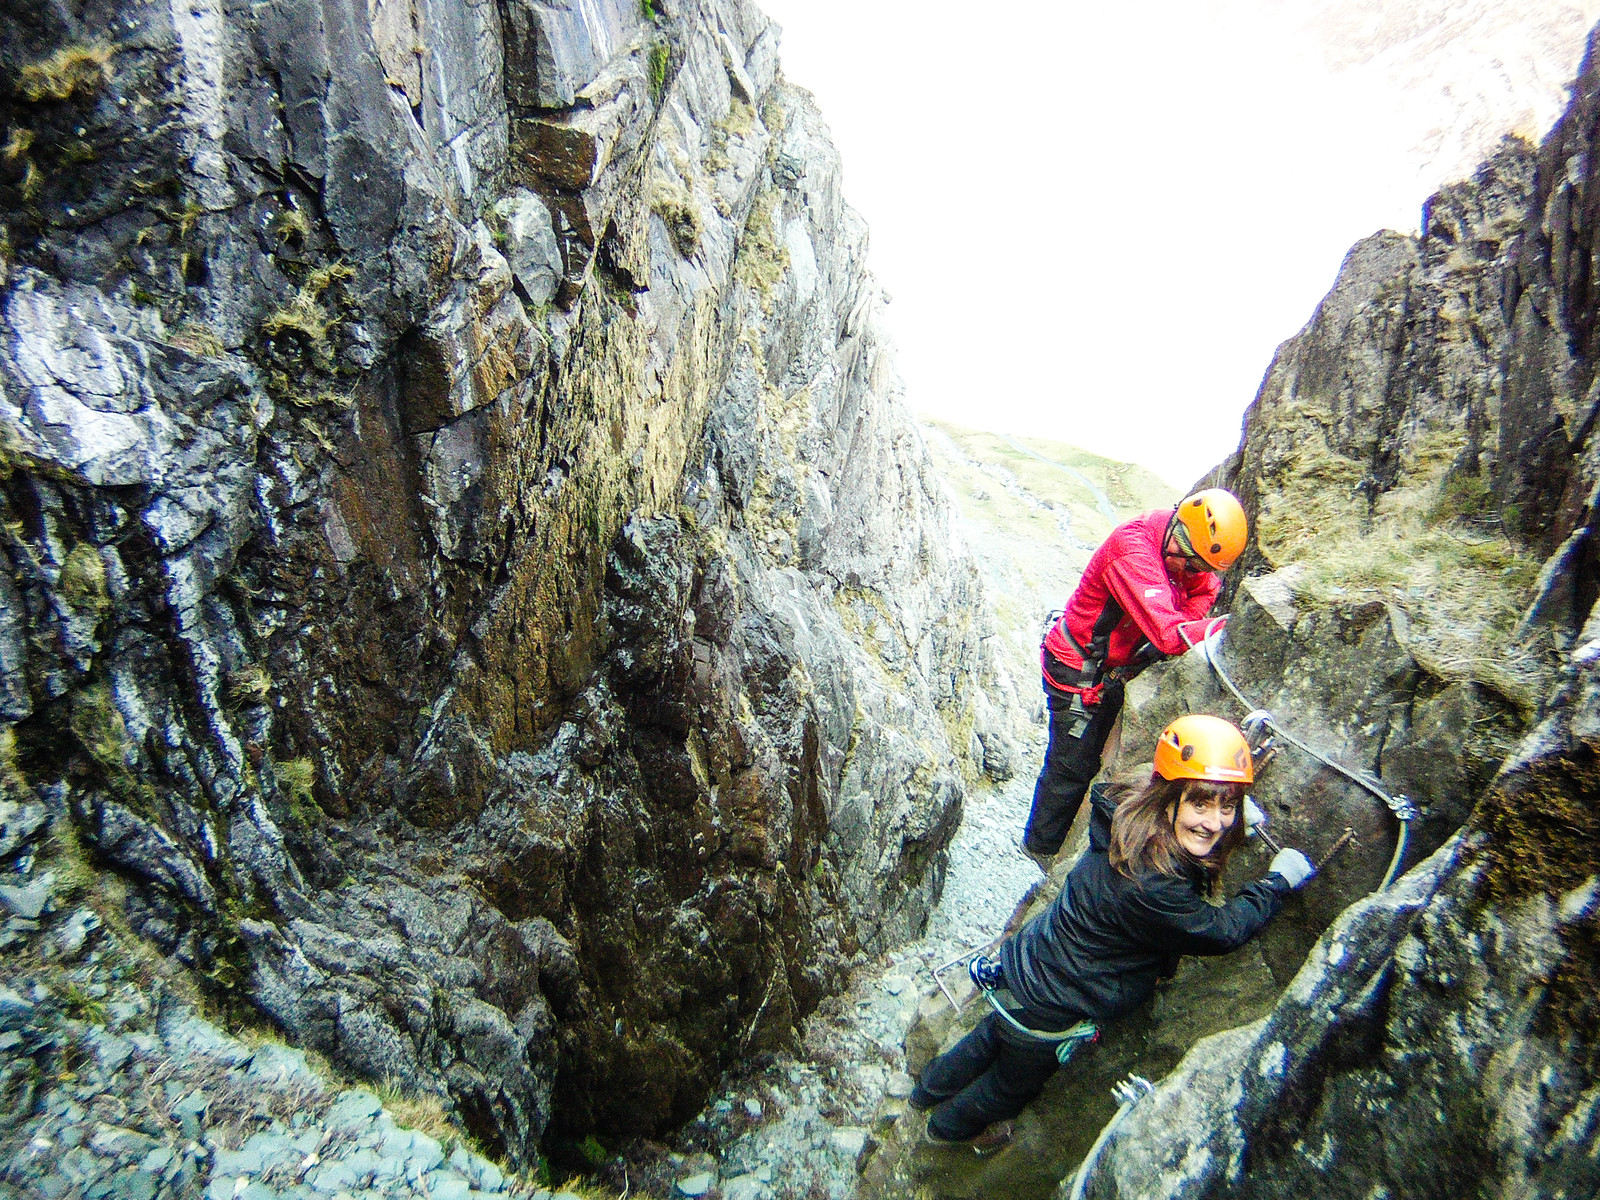 Navigating ladders overhanging a steep gully